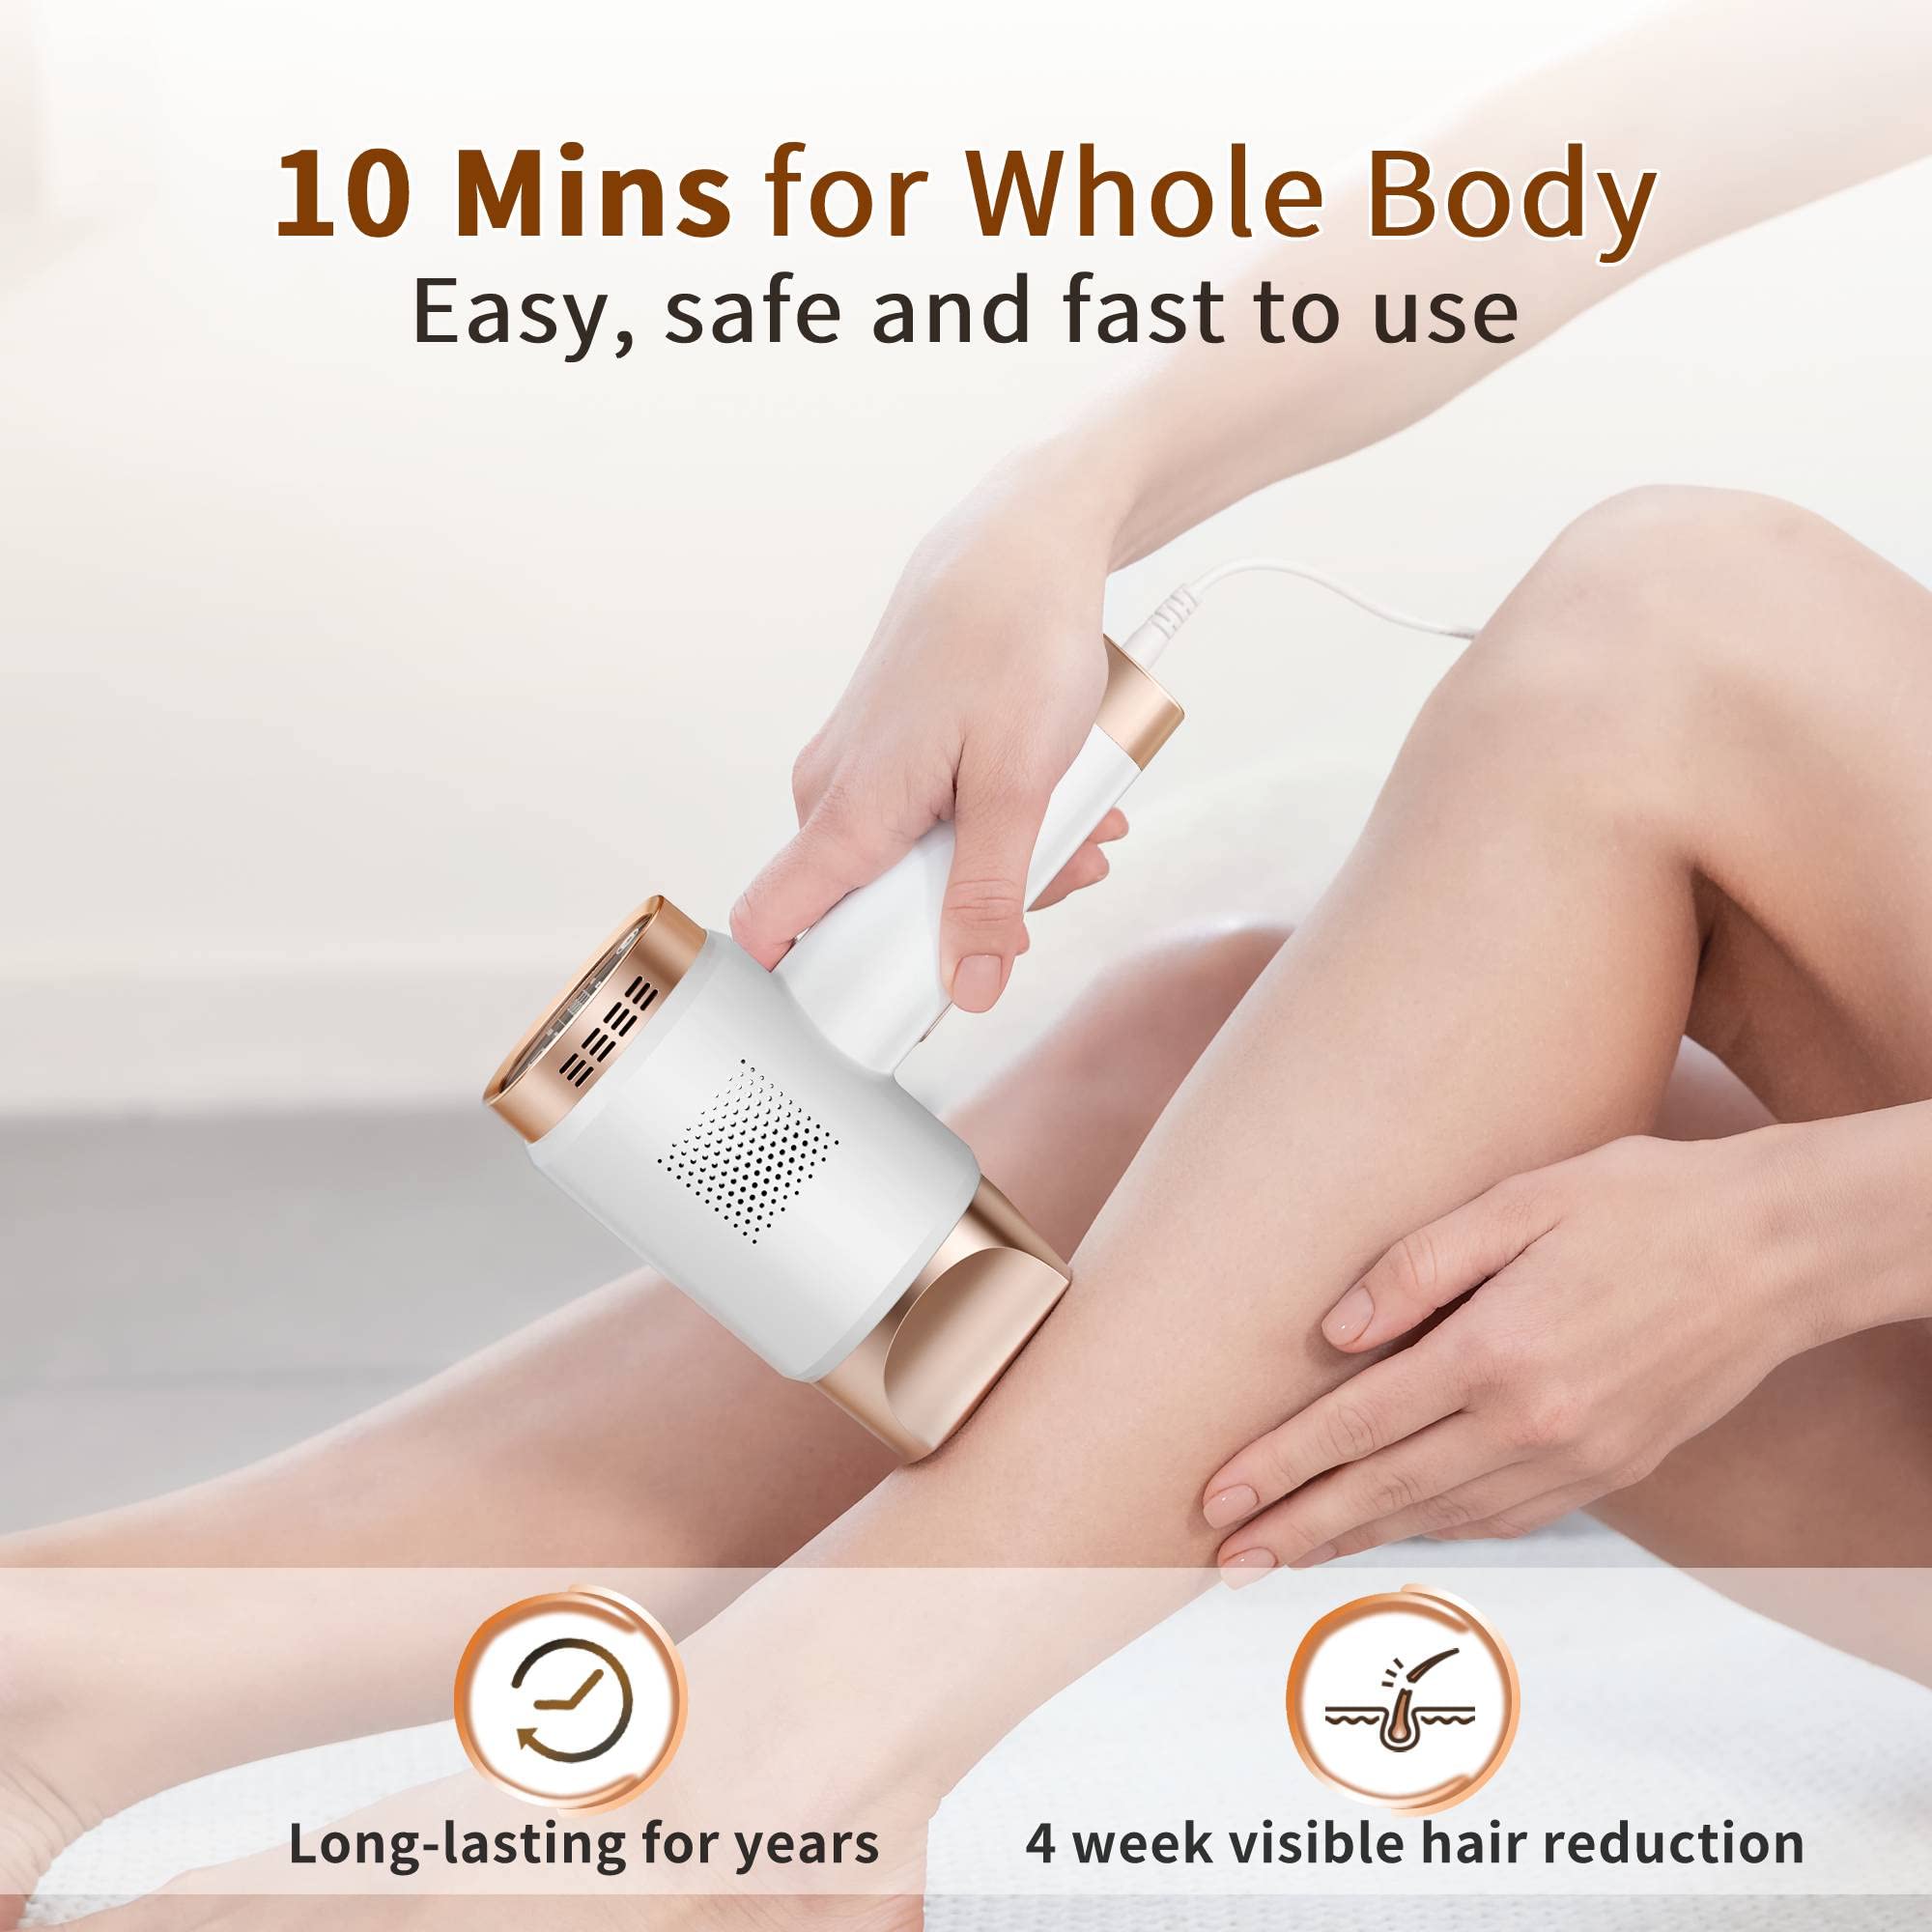 Aopvui Laser Hair Removal for Women and Men, IPL Permanent Hair Removal 999900 Flashes Hair Remover Device for Whole Body Use